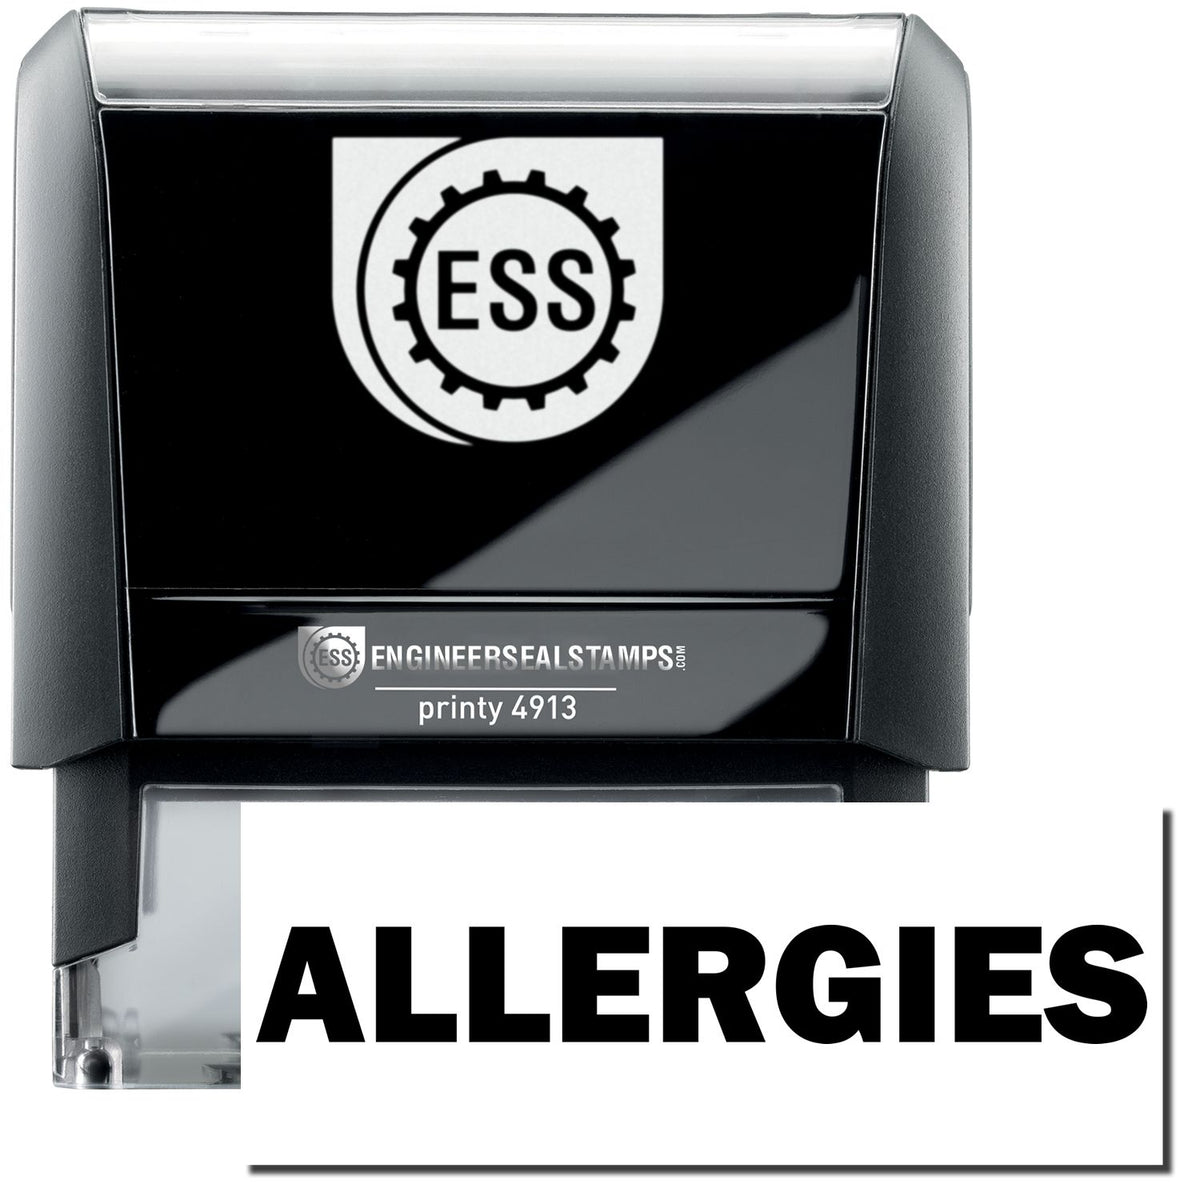 A self-inking stamp with a stamped image showing how the text &quot;ALLERGIES&quot; in a large bold font is displayed by it after stamping.